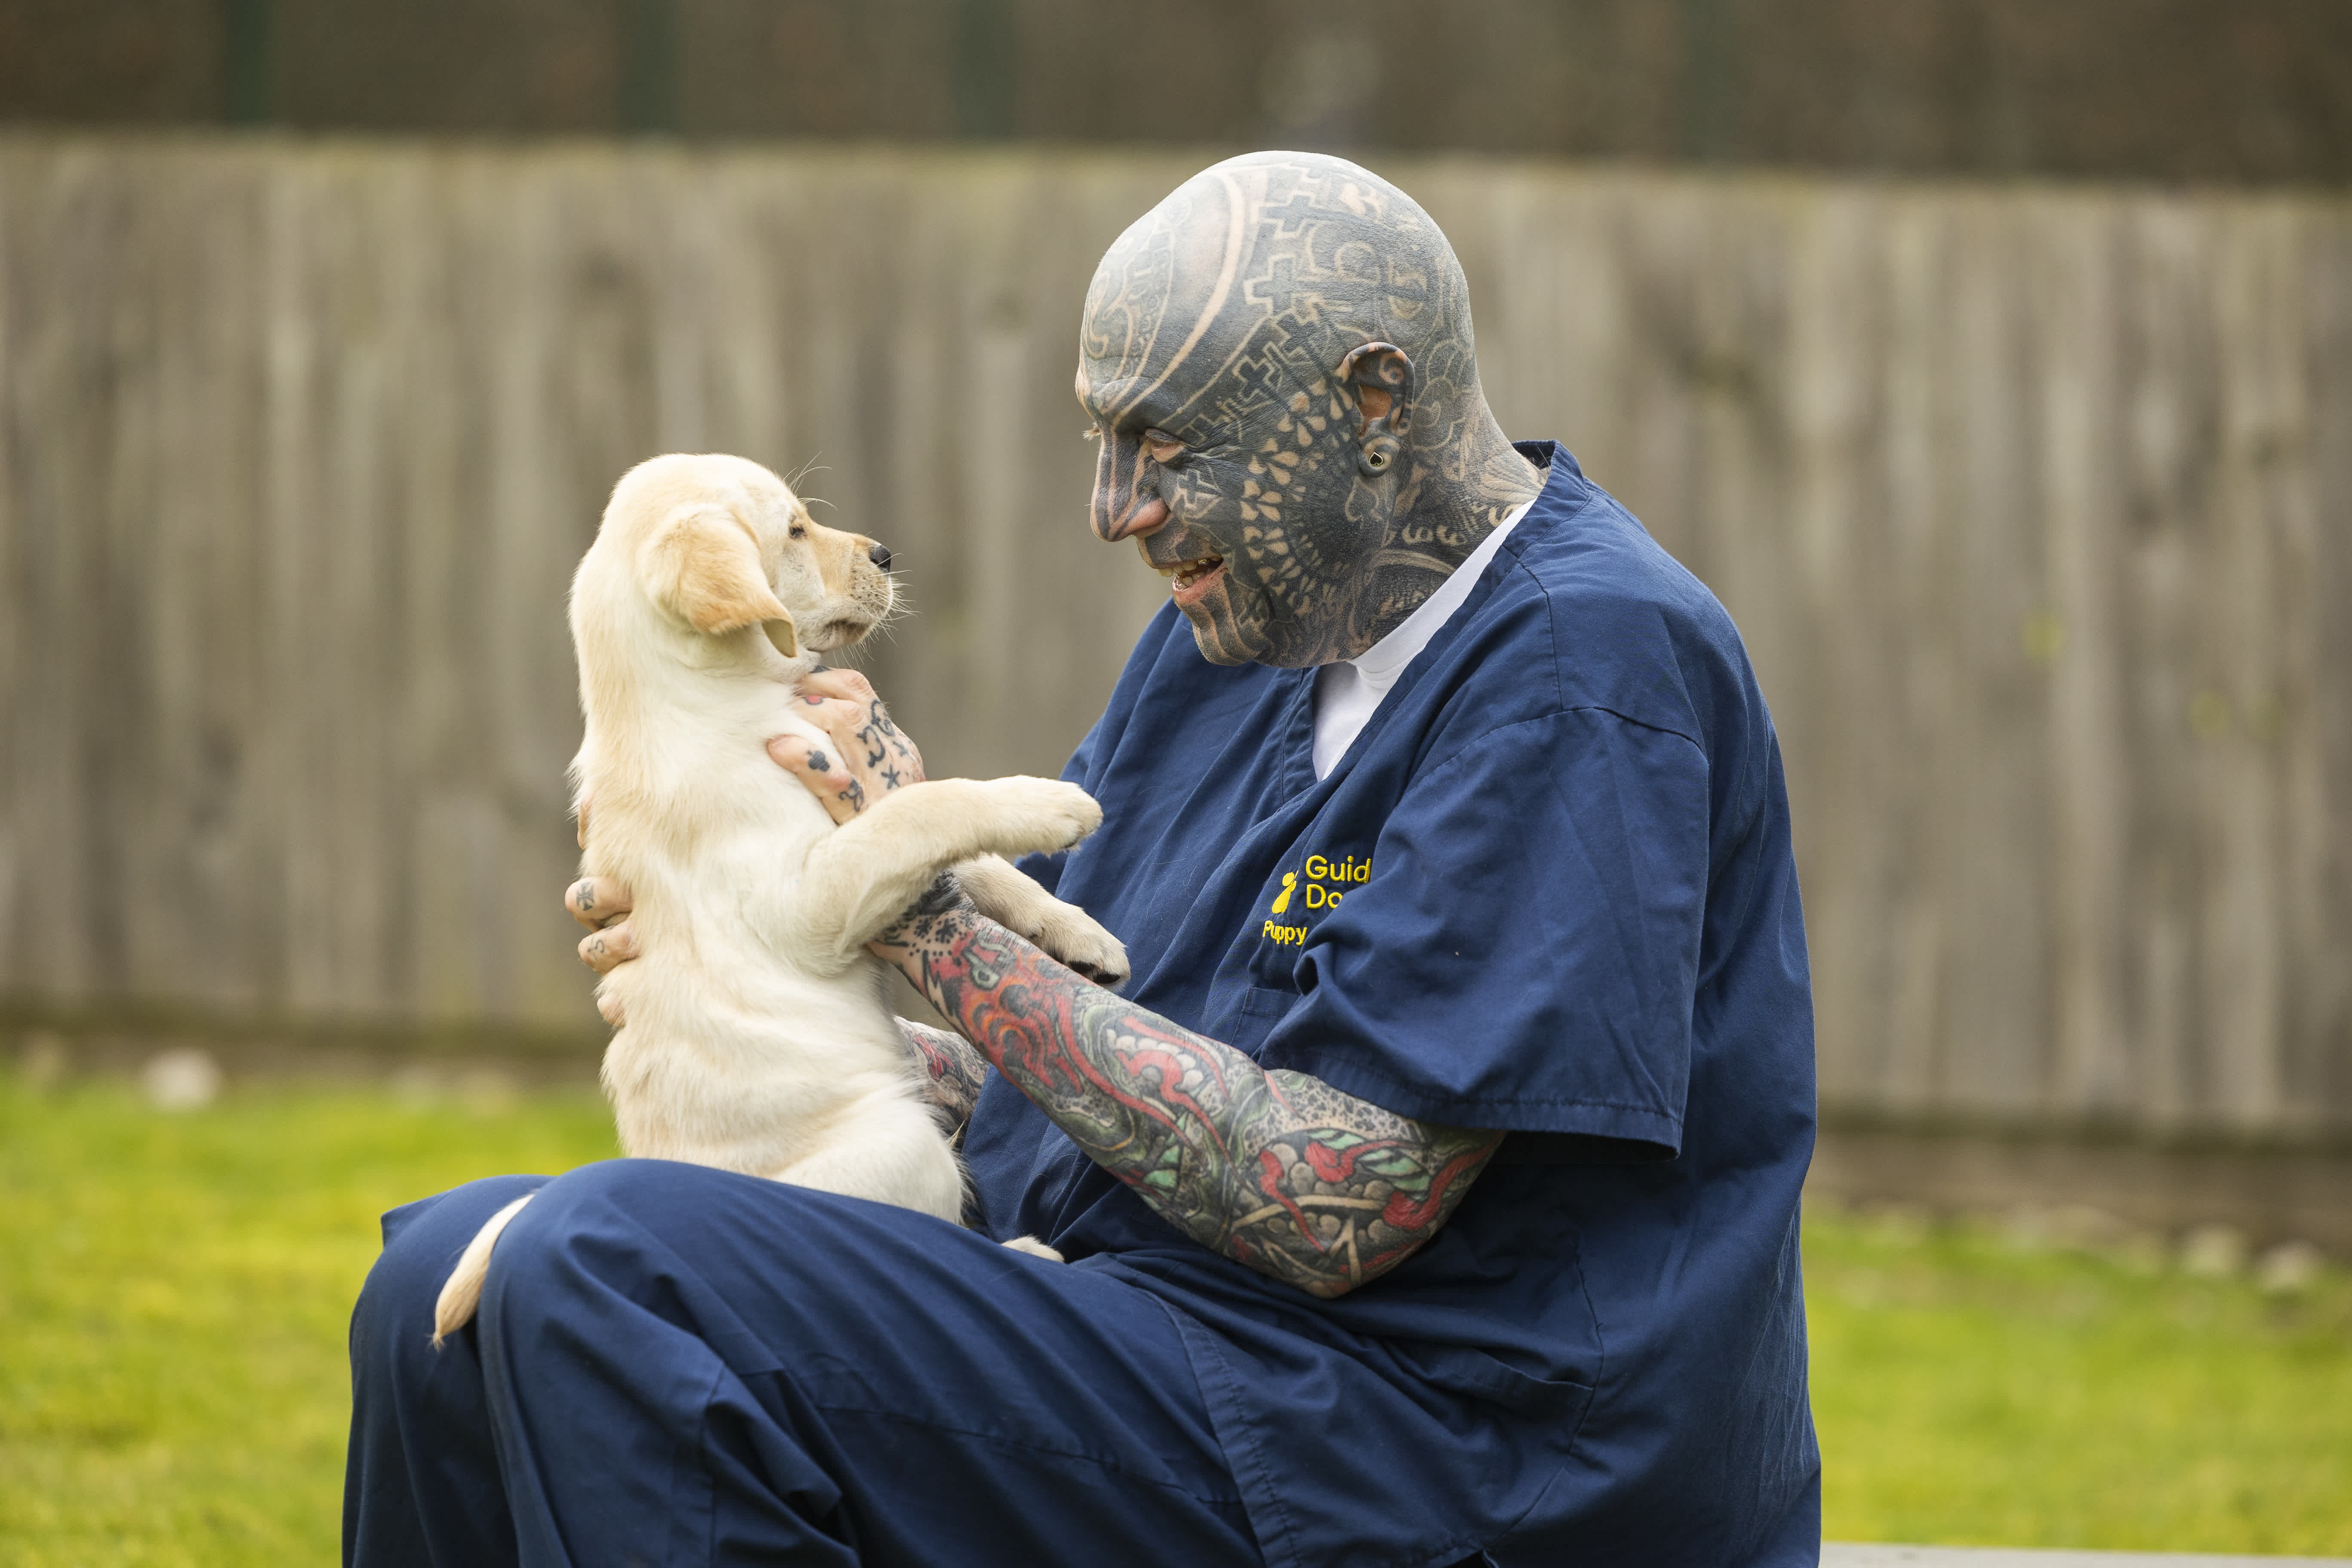 A man with lots of blue coloured tattoos covering his head and arms sits wearing Guide Dogs branded blue scrubs. He is holding a young yellow Labrador guide dog puppy in his lap. 